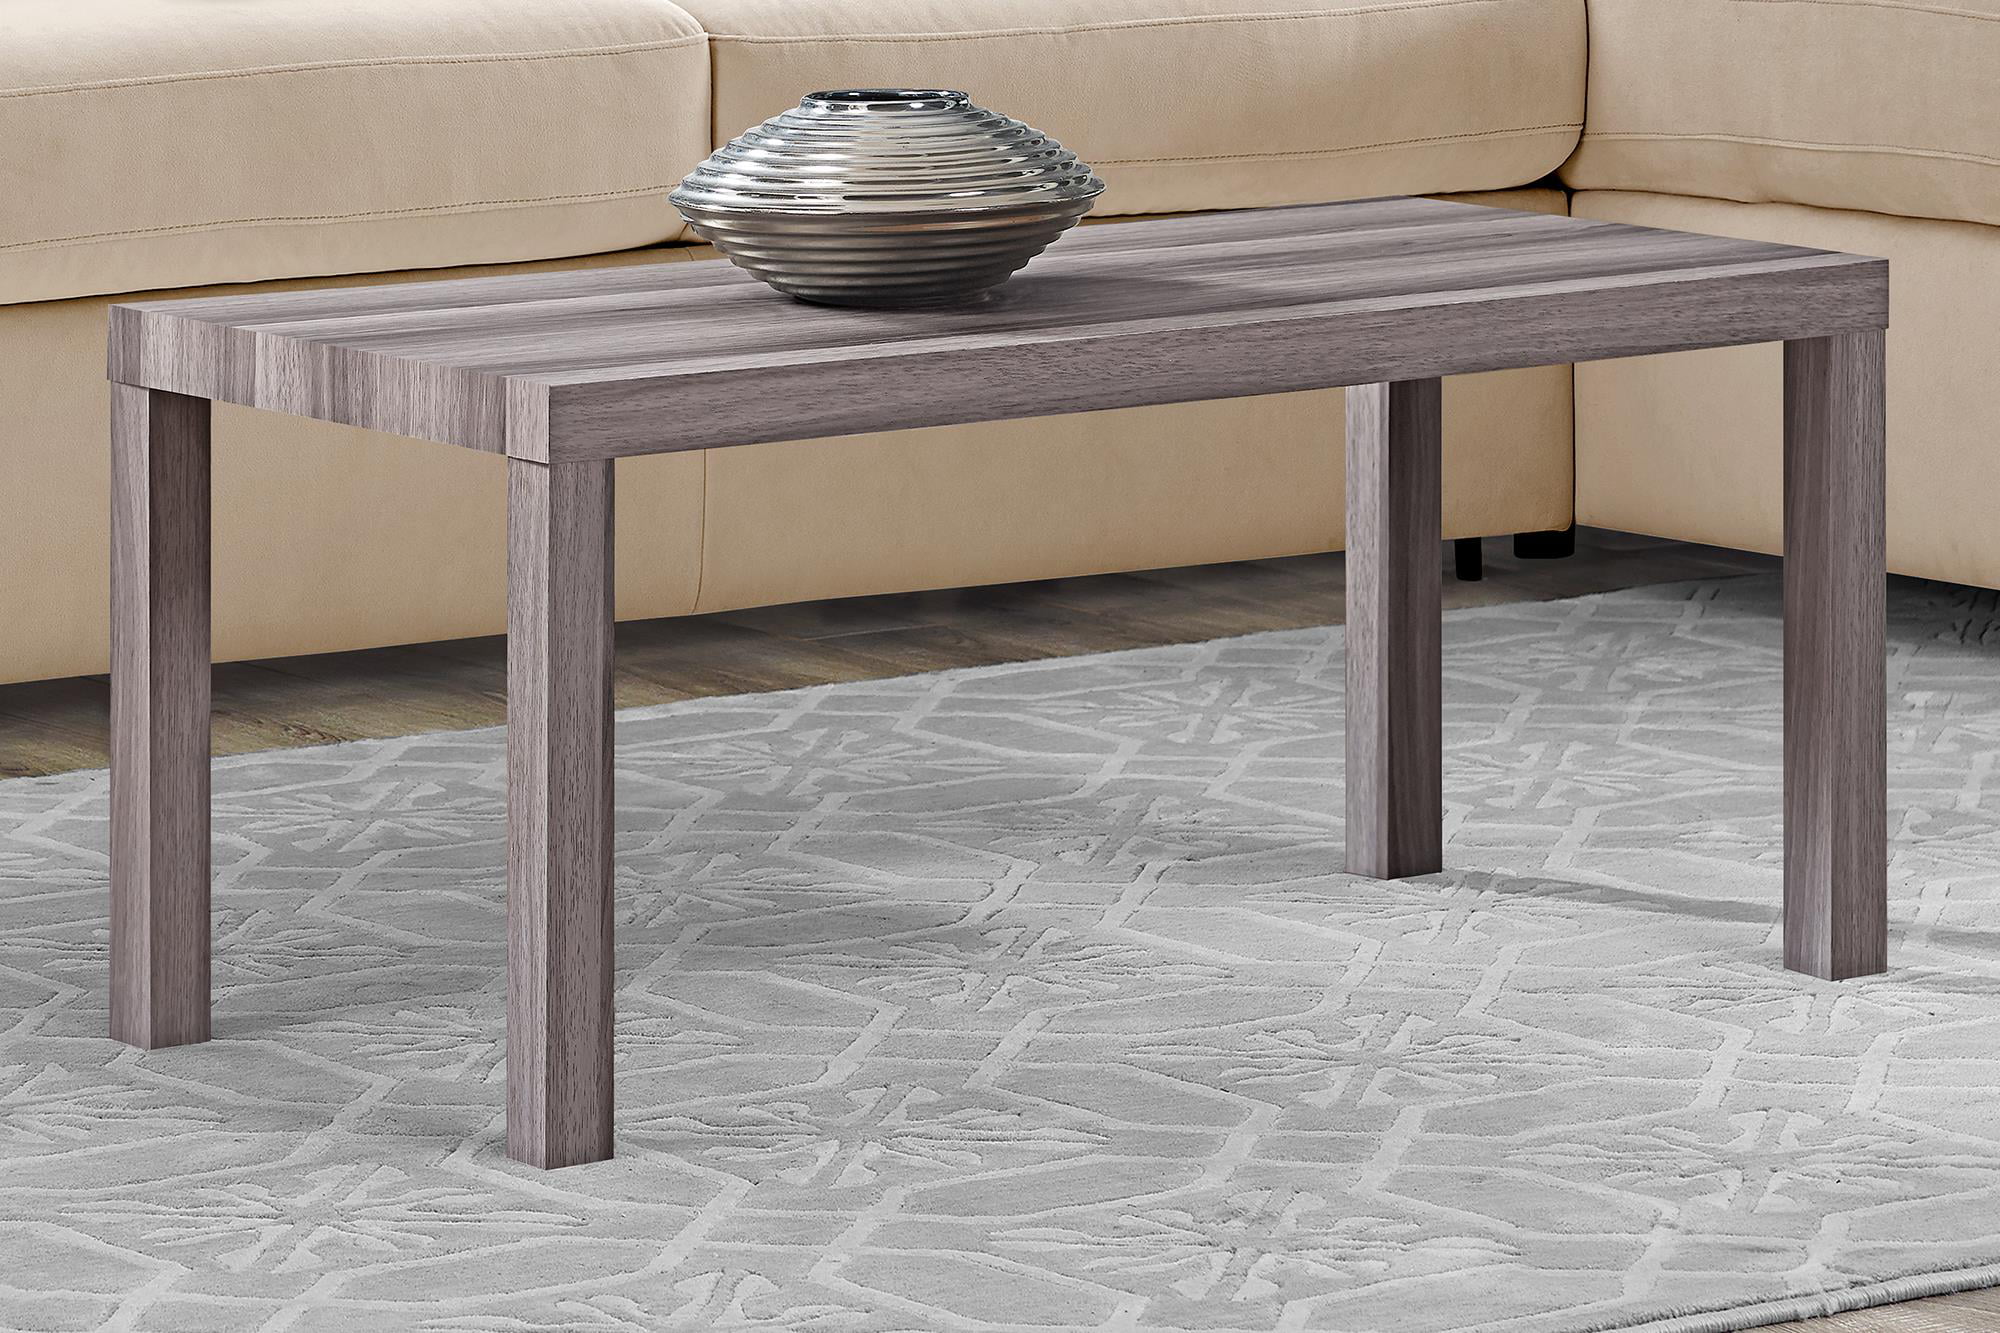 Mainstays Parsons Coffee Table, Lightweight, Multiple Colors - Walmart